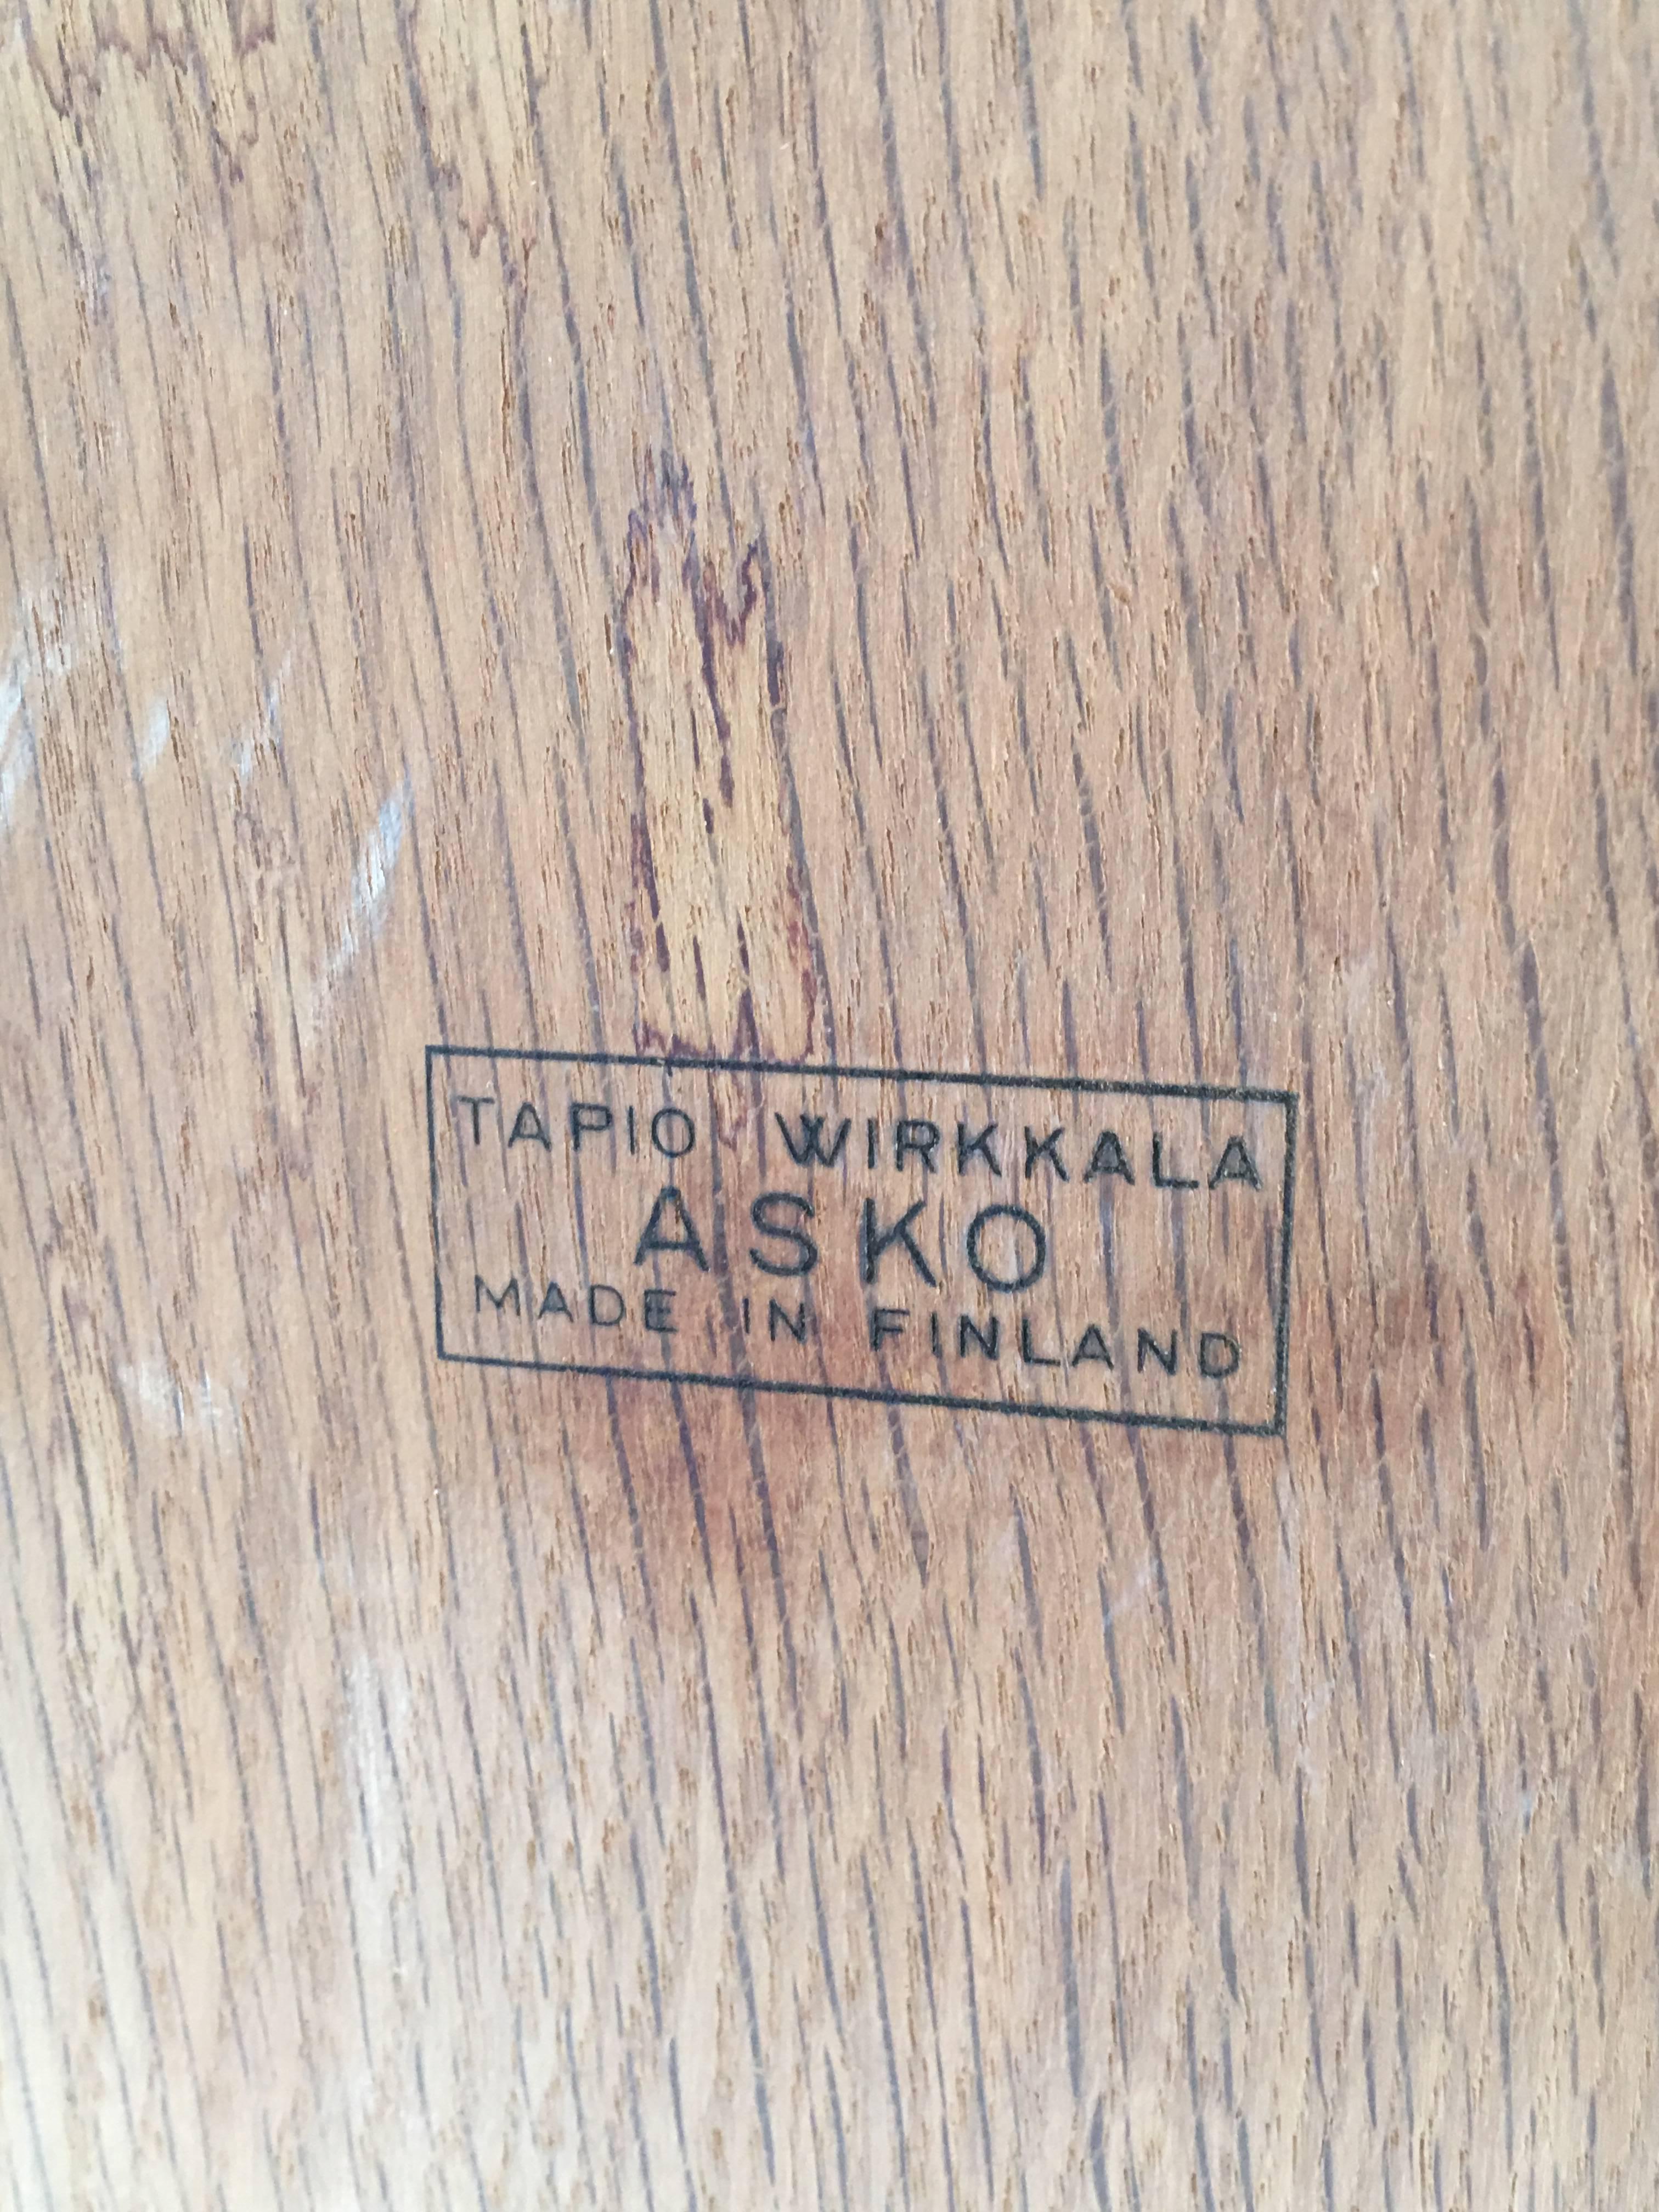 Rare Tapio Wirkkala 'Leaf' Coffee Table Asko Finland 1950s In Excellent Condition For Sale In bergen op zoom, NL